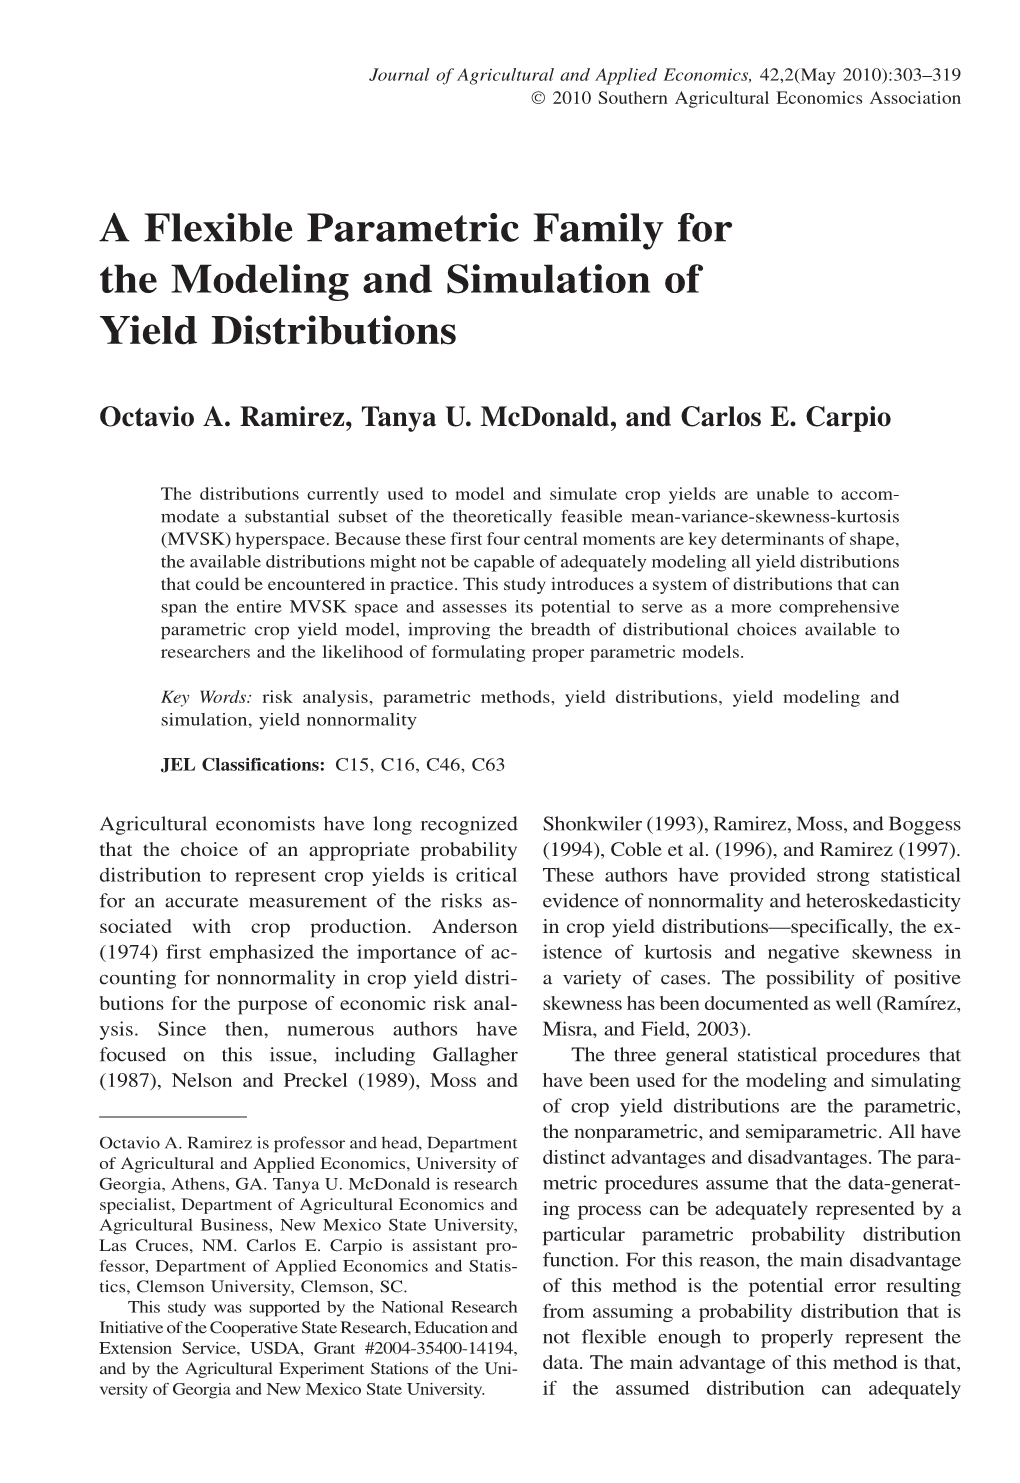 A Flexible Parametric Family for the Modeling and Simulation of Yield Distributions